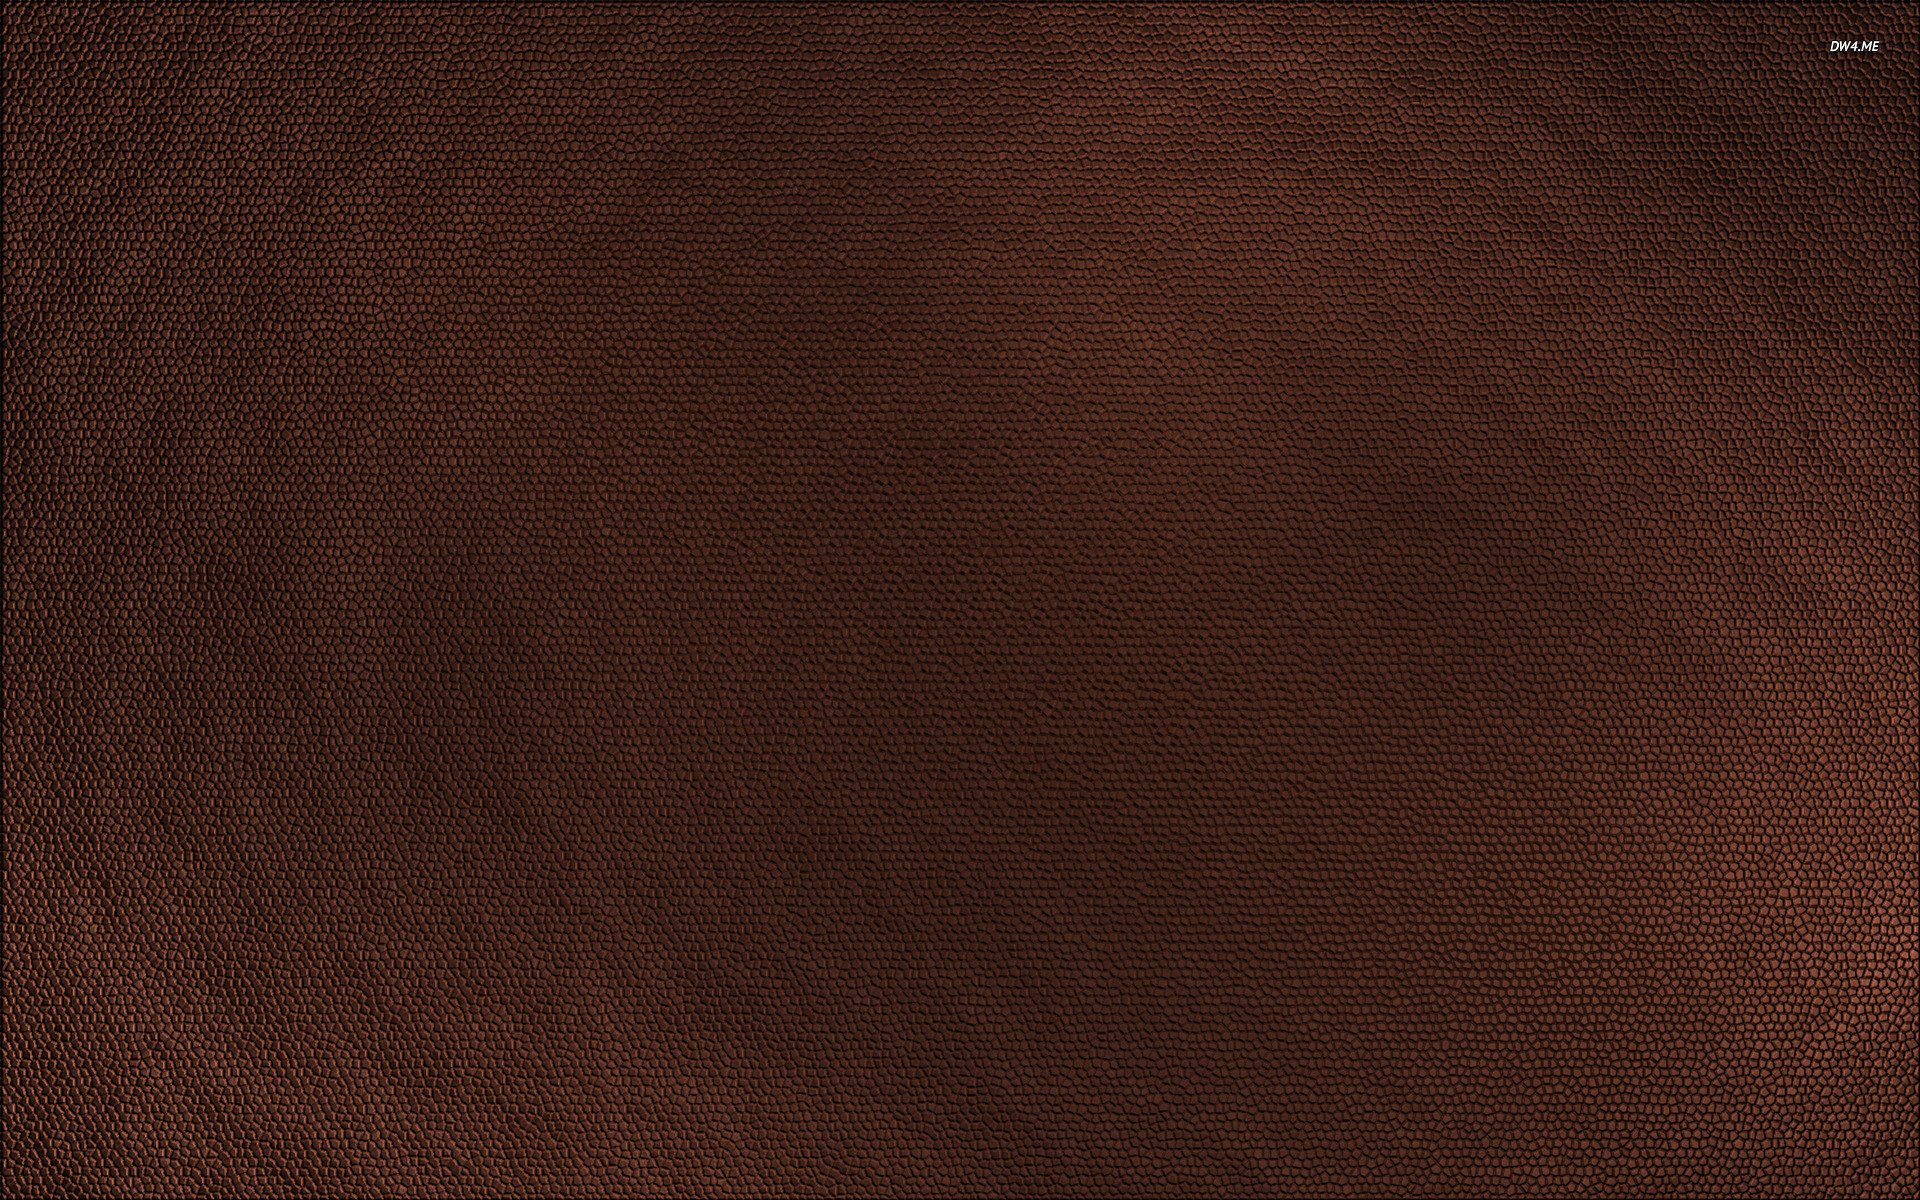 1920x1200 Brown Leather Wallpaper